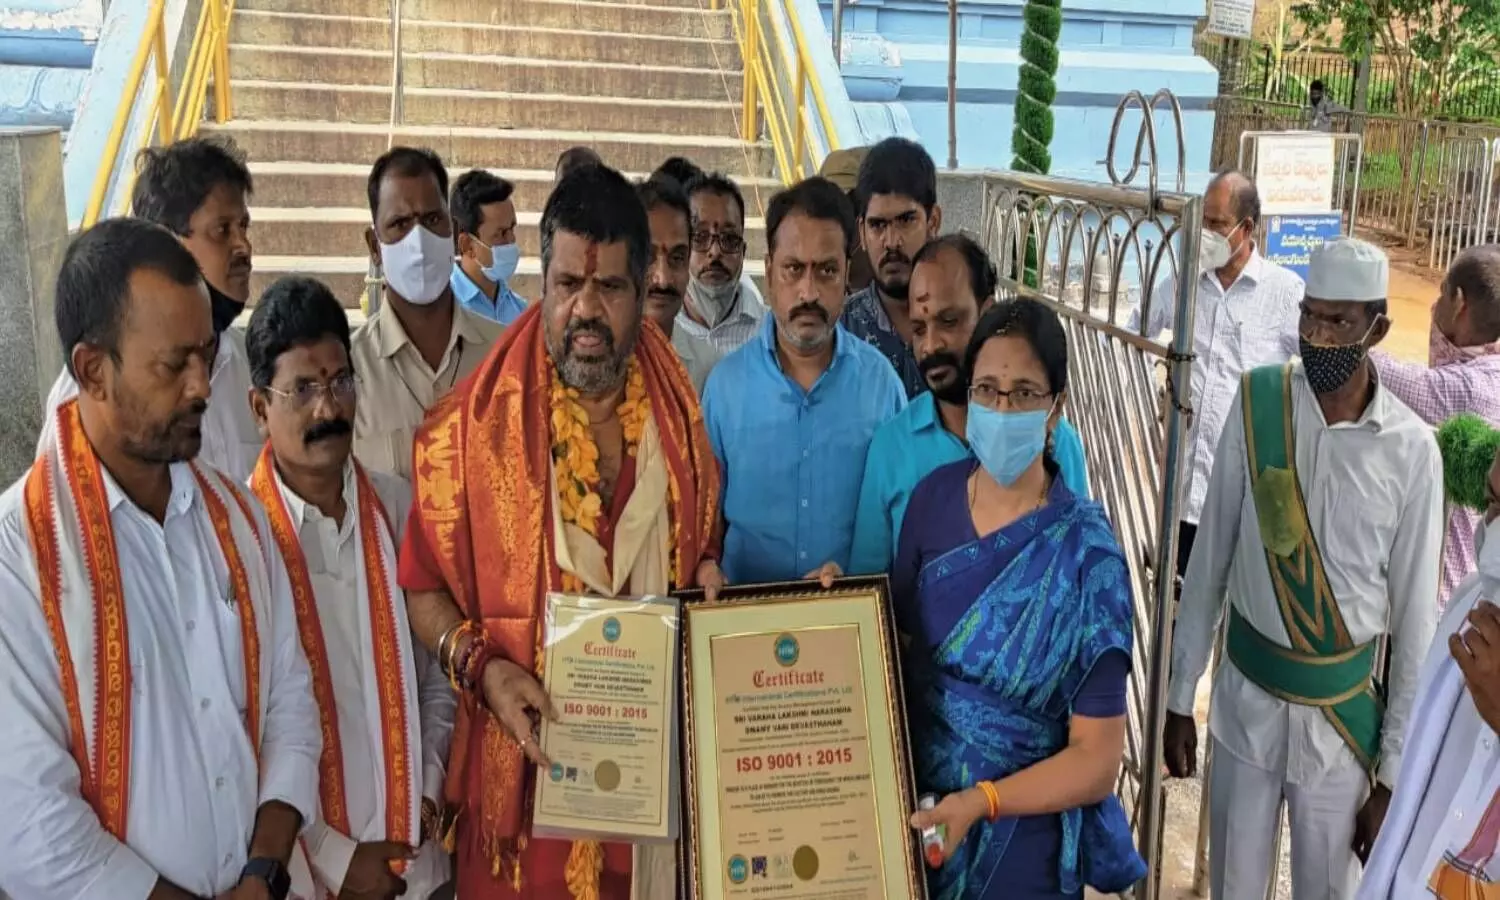 Simhachalam temple conferred with ISO certificate